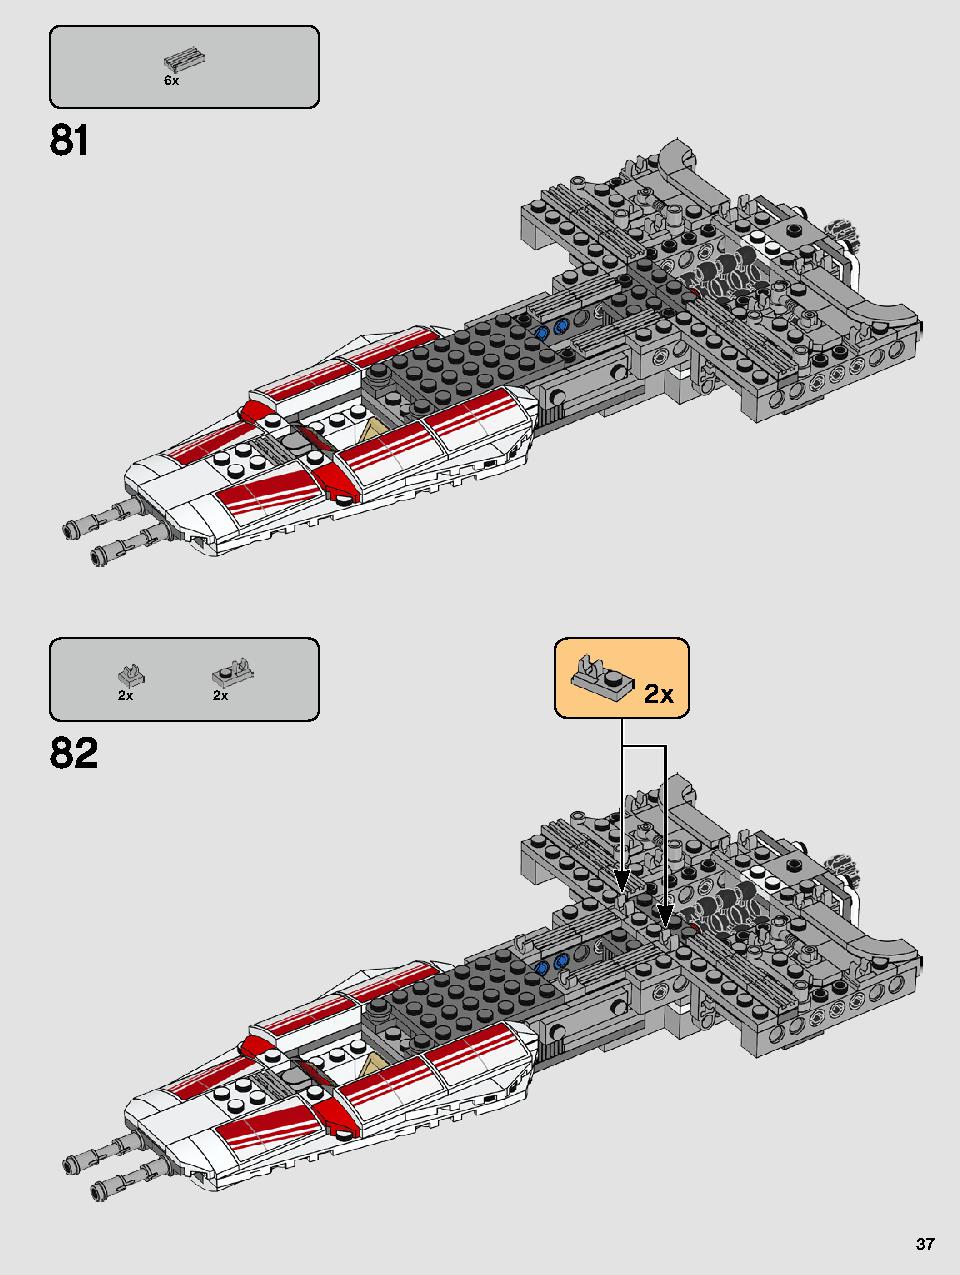 Resistance Y-Wing Starfighter 75249 LEGO information LEGO instructions 37 page